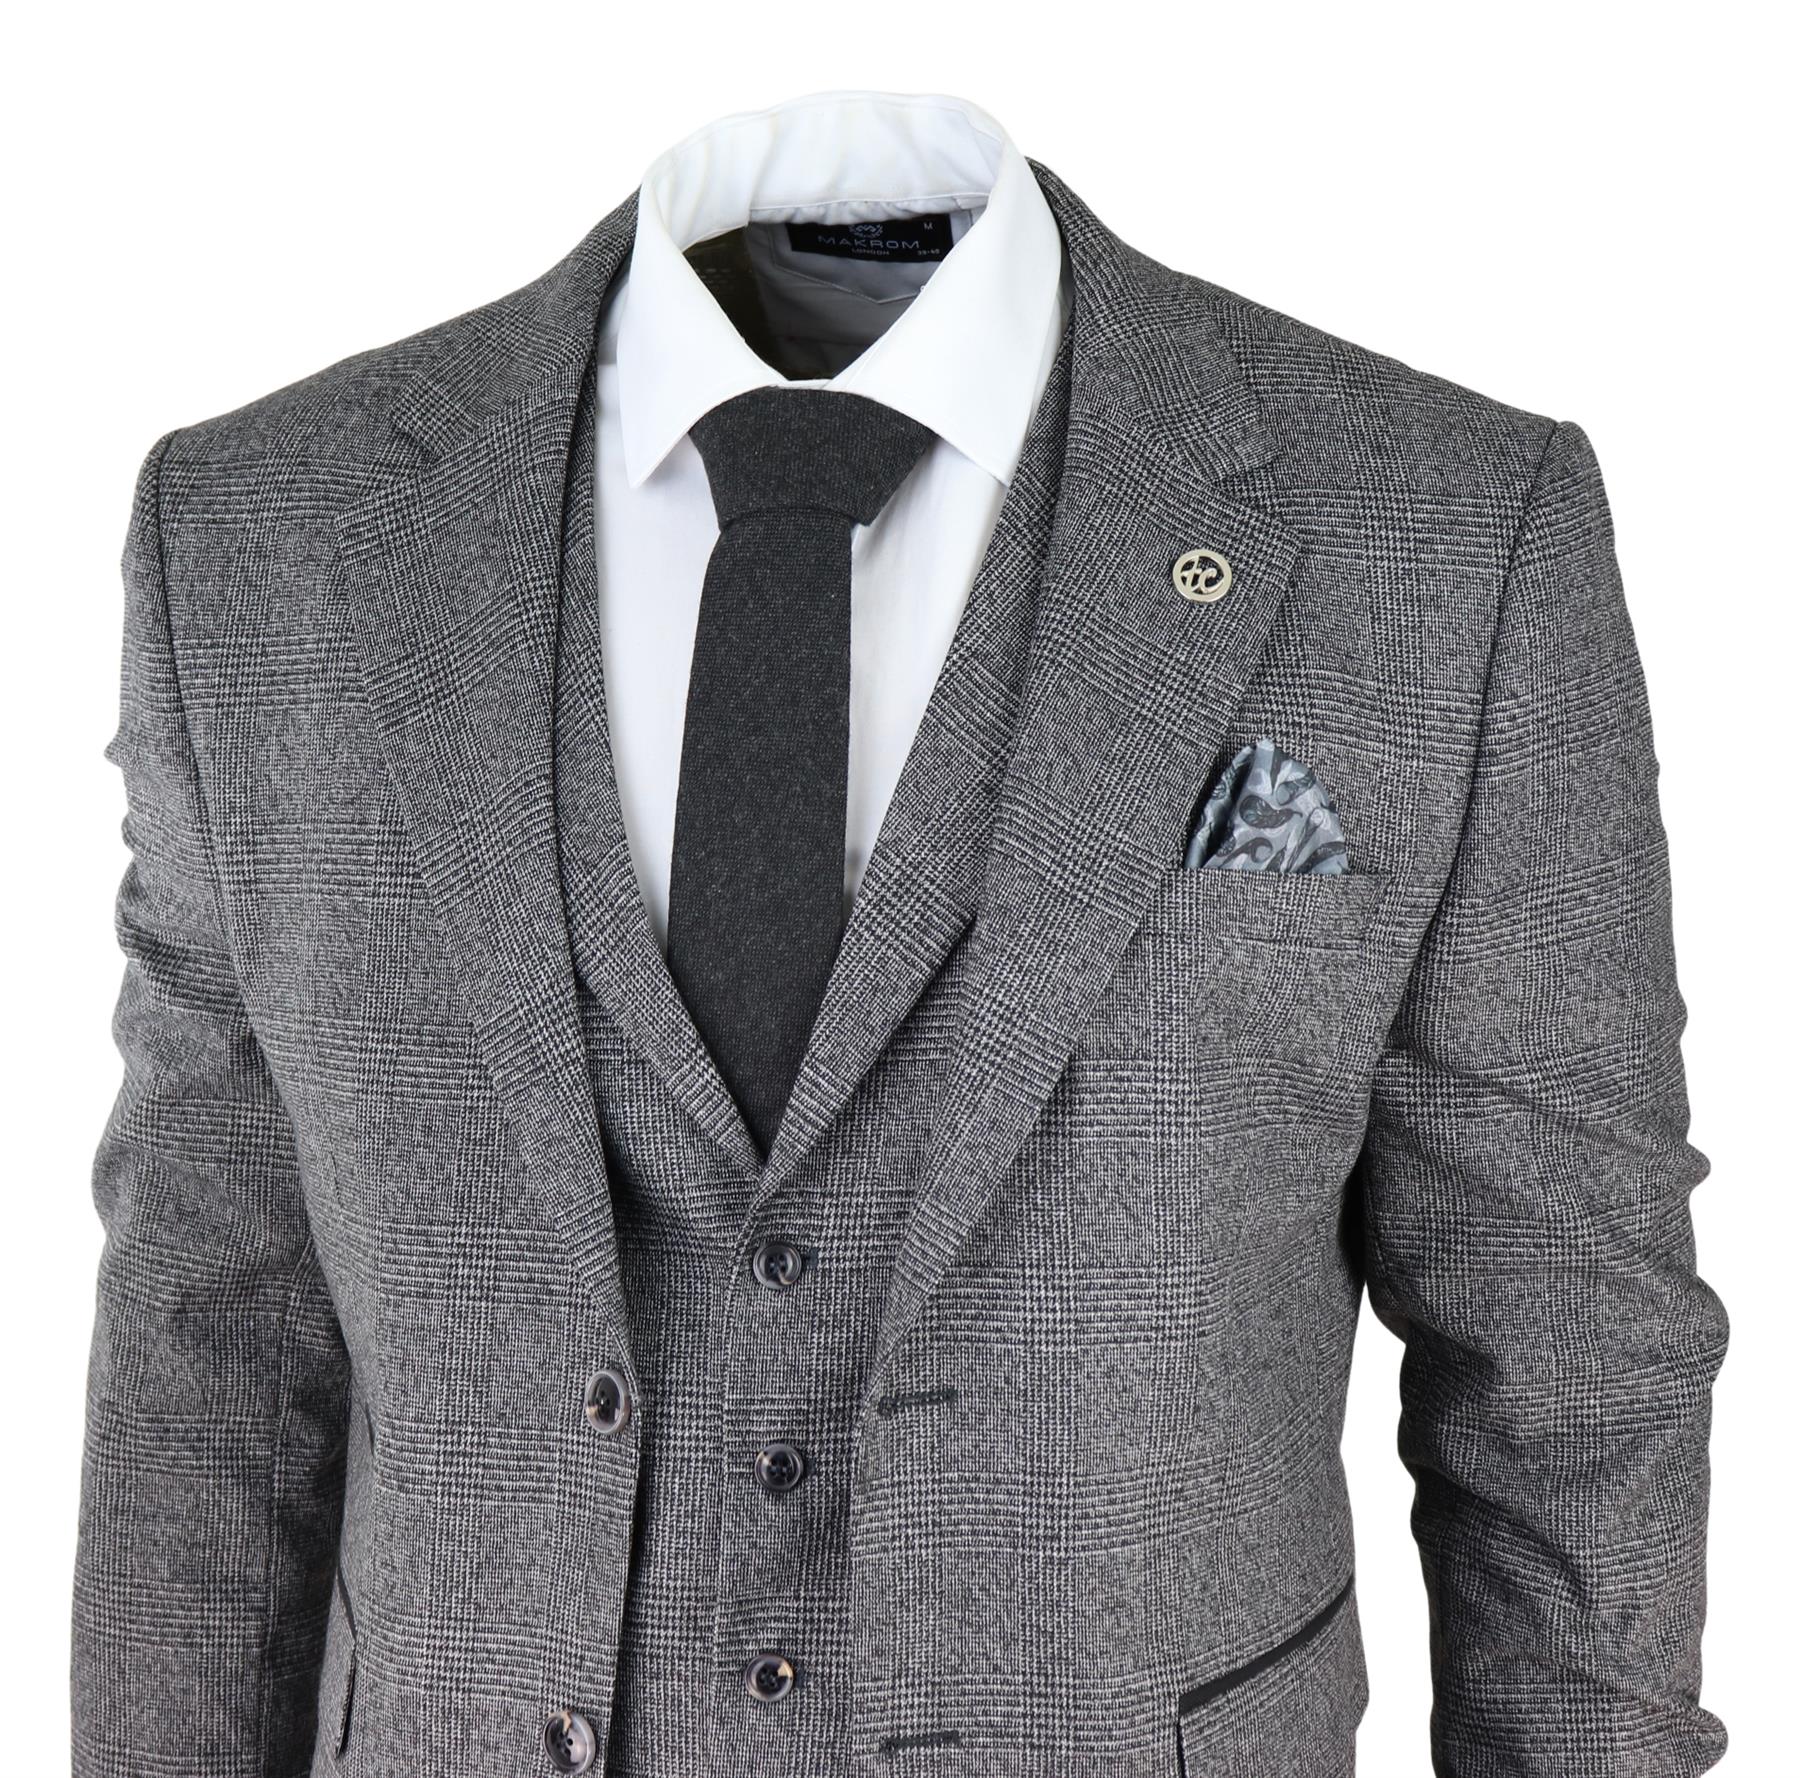 Mens Grey 3 Piece Suit Prince of Wales Check Classic Tailored Fit Wedding Suit